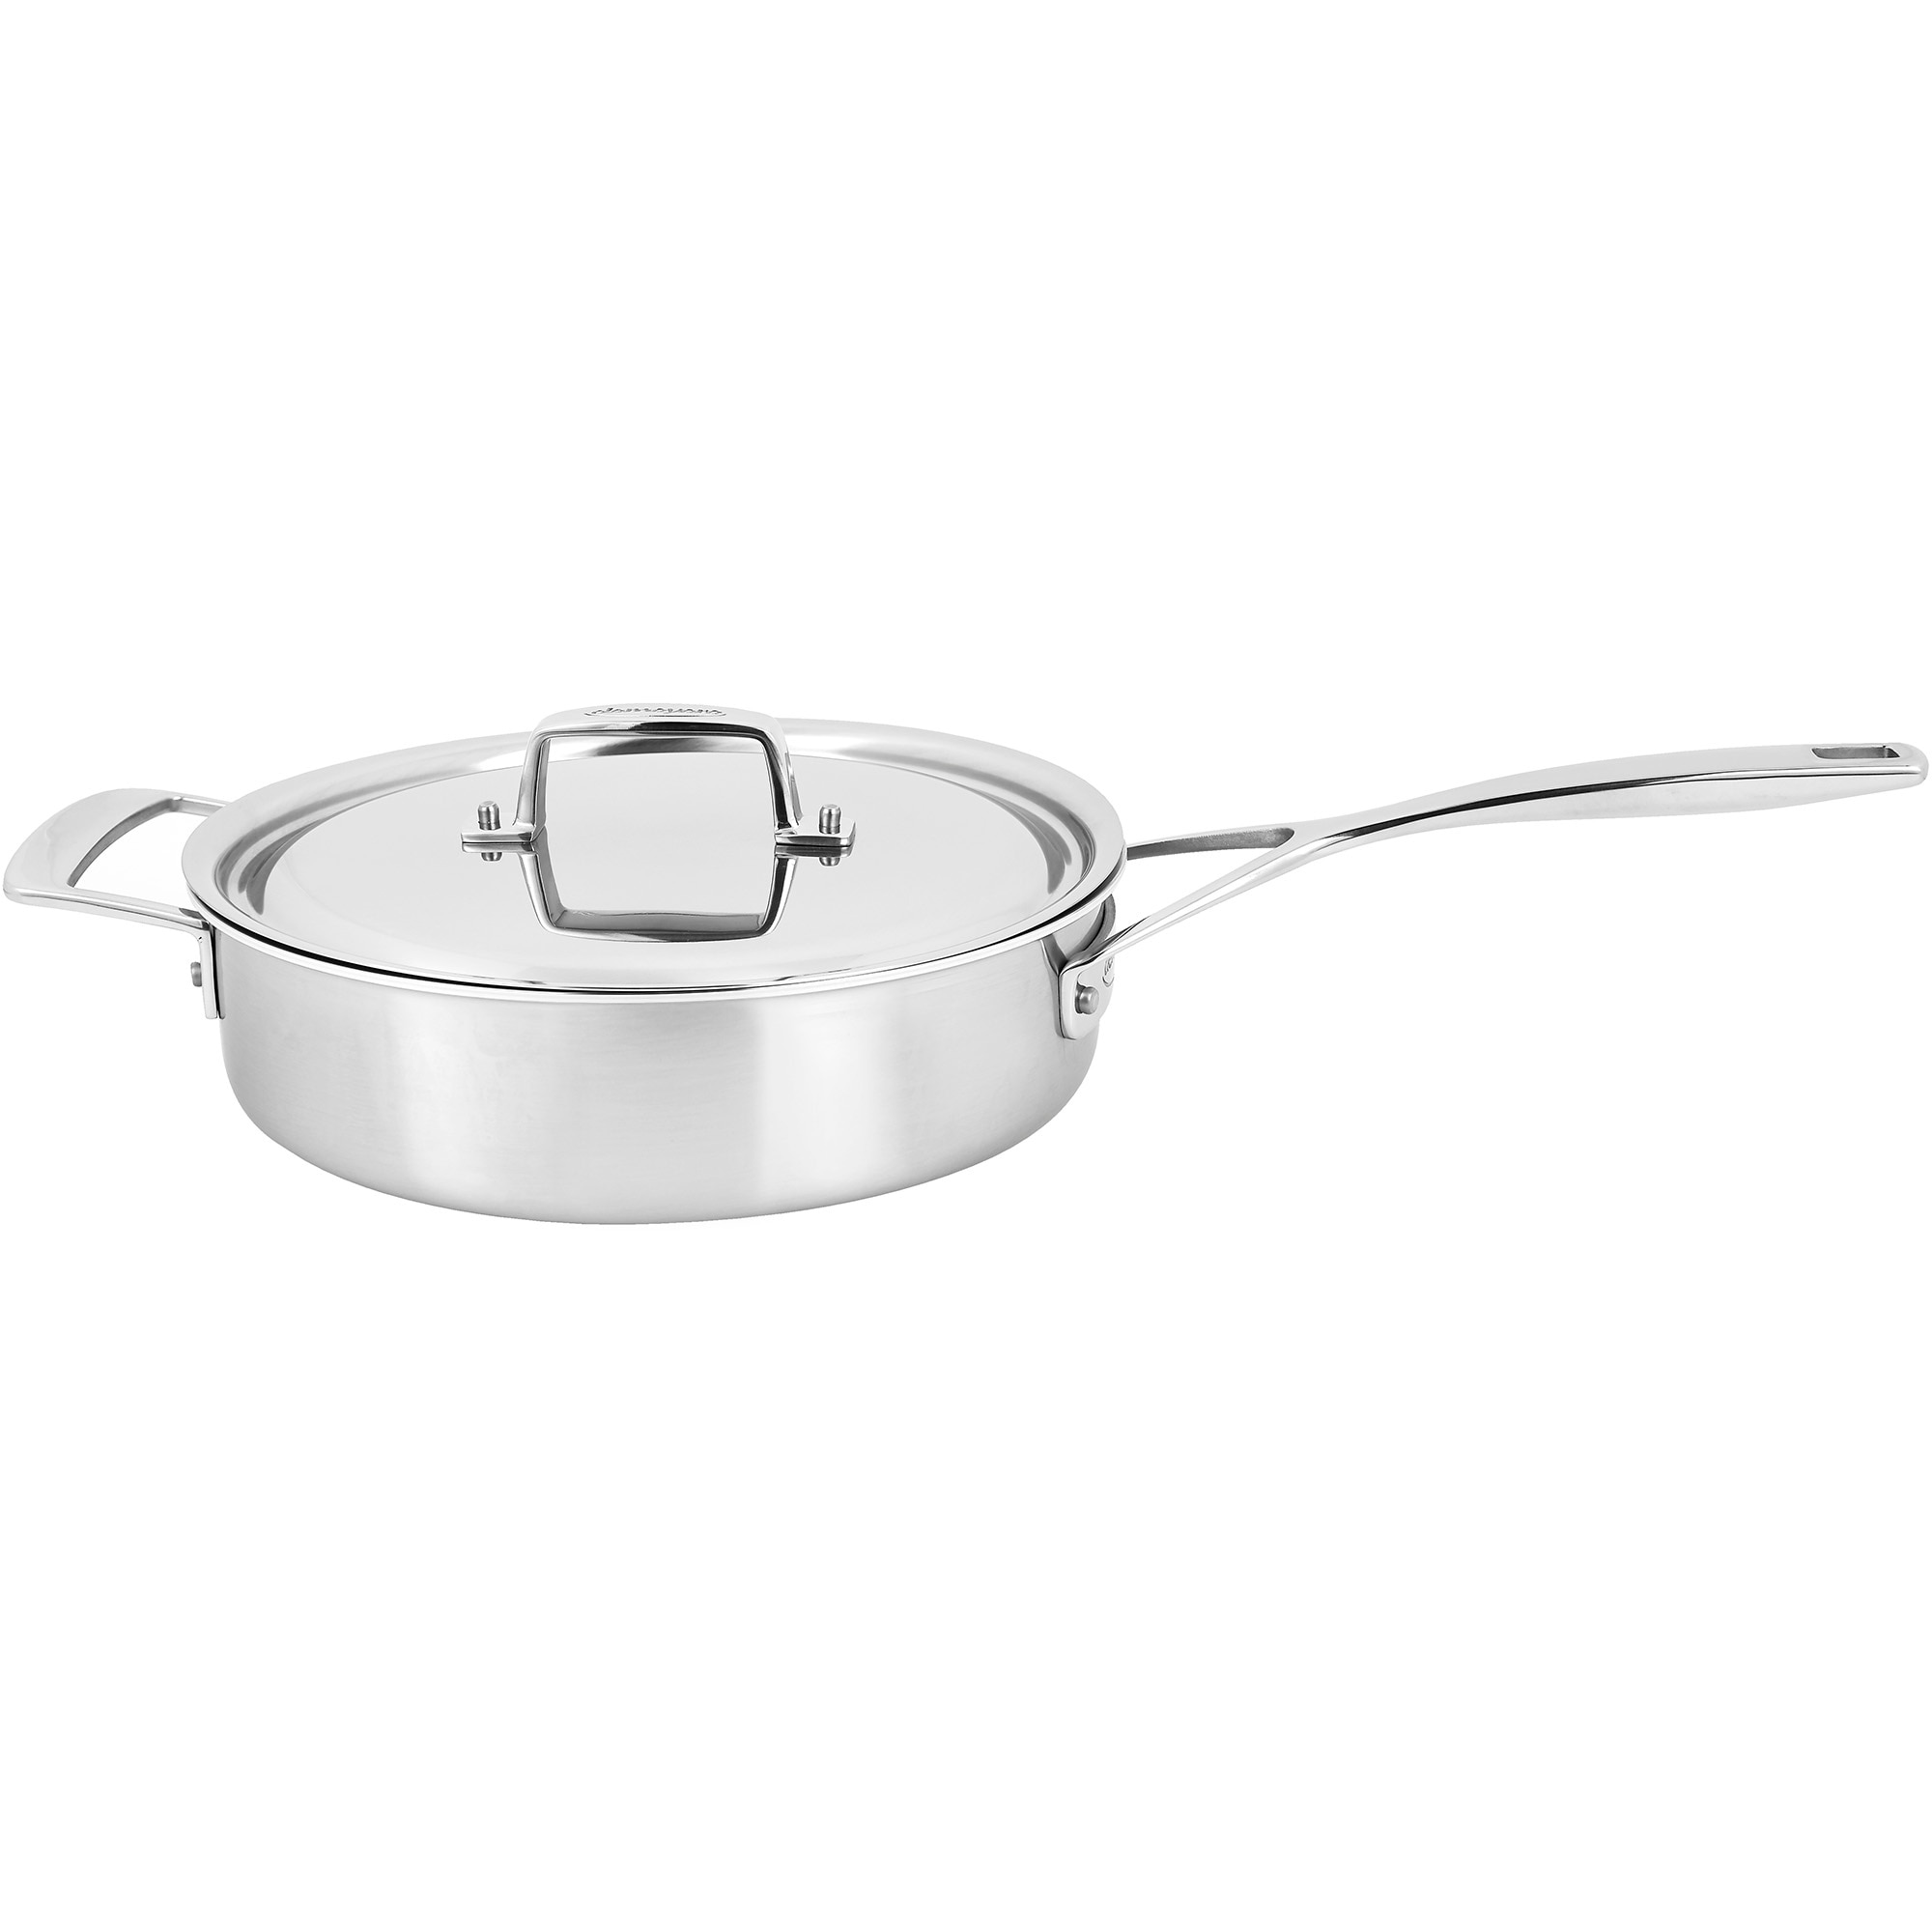 https://ak1.ostkcdn.com/images/products/is/images/direct/0378962863863bfbb6031a58c87aa2c58205c859/Demeyere-Essential-5-ply-3-qt-Stainless-Steel-Saute-Pan-with-Lid.jpg